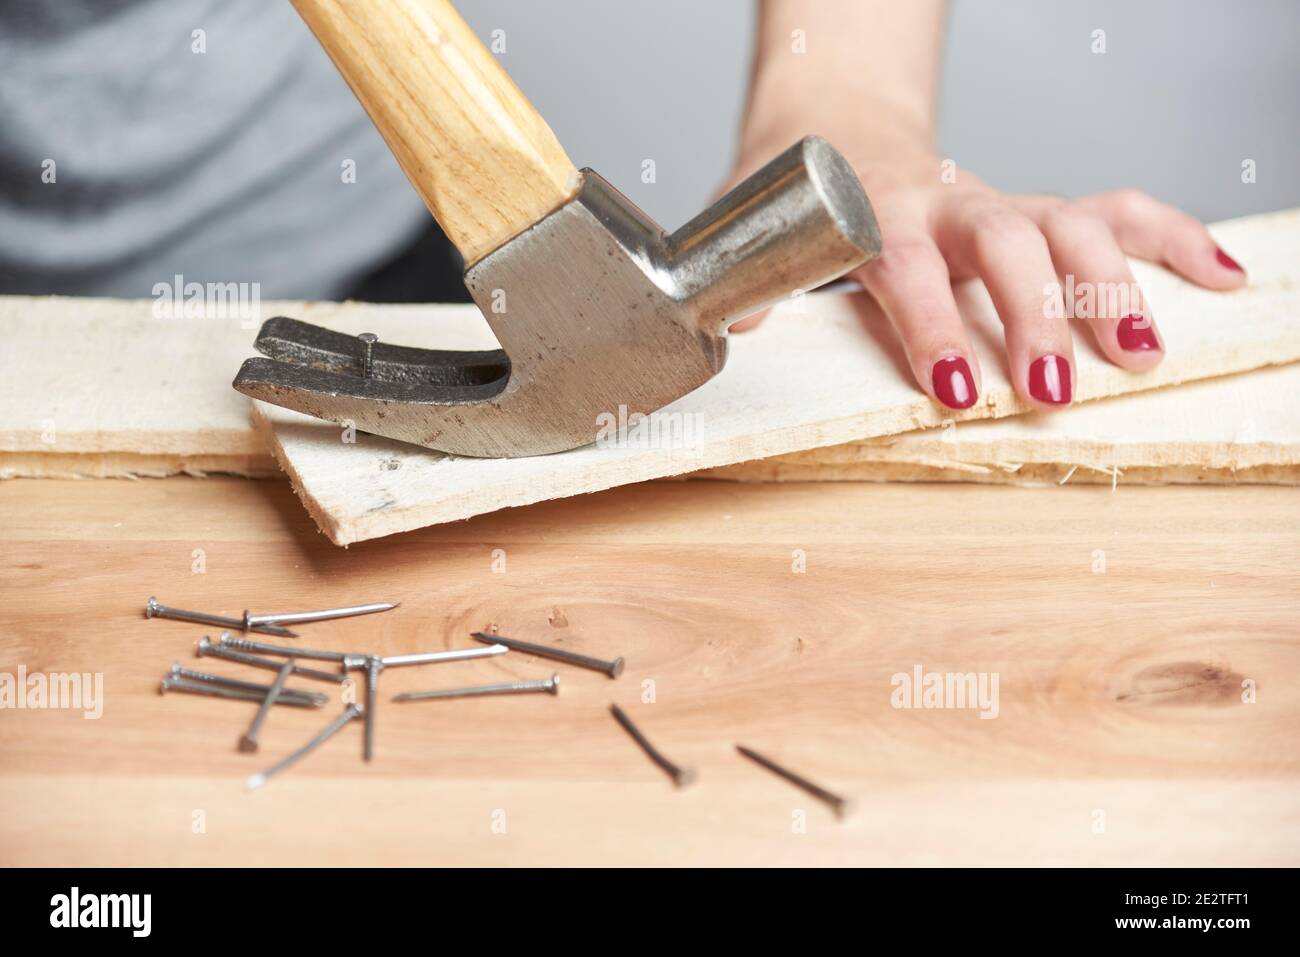 detail of carpentry a young caucasian woman with her nails done removing a nail from a piece of wood using a claw hammer 2E2TFT1